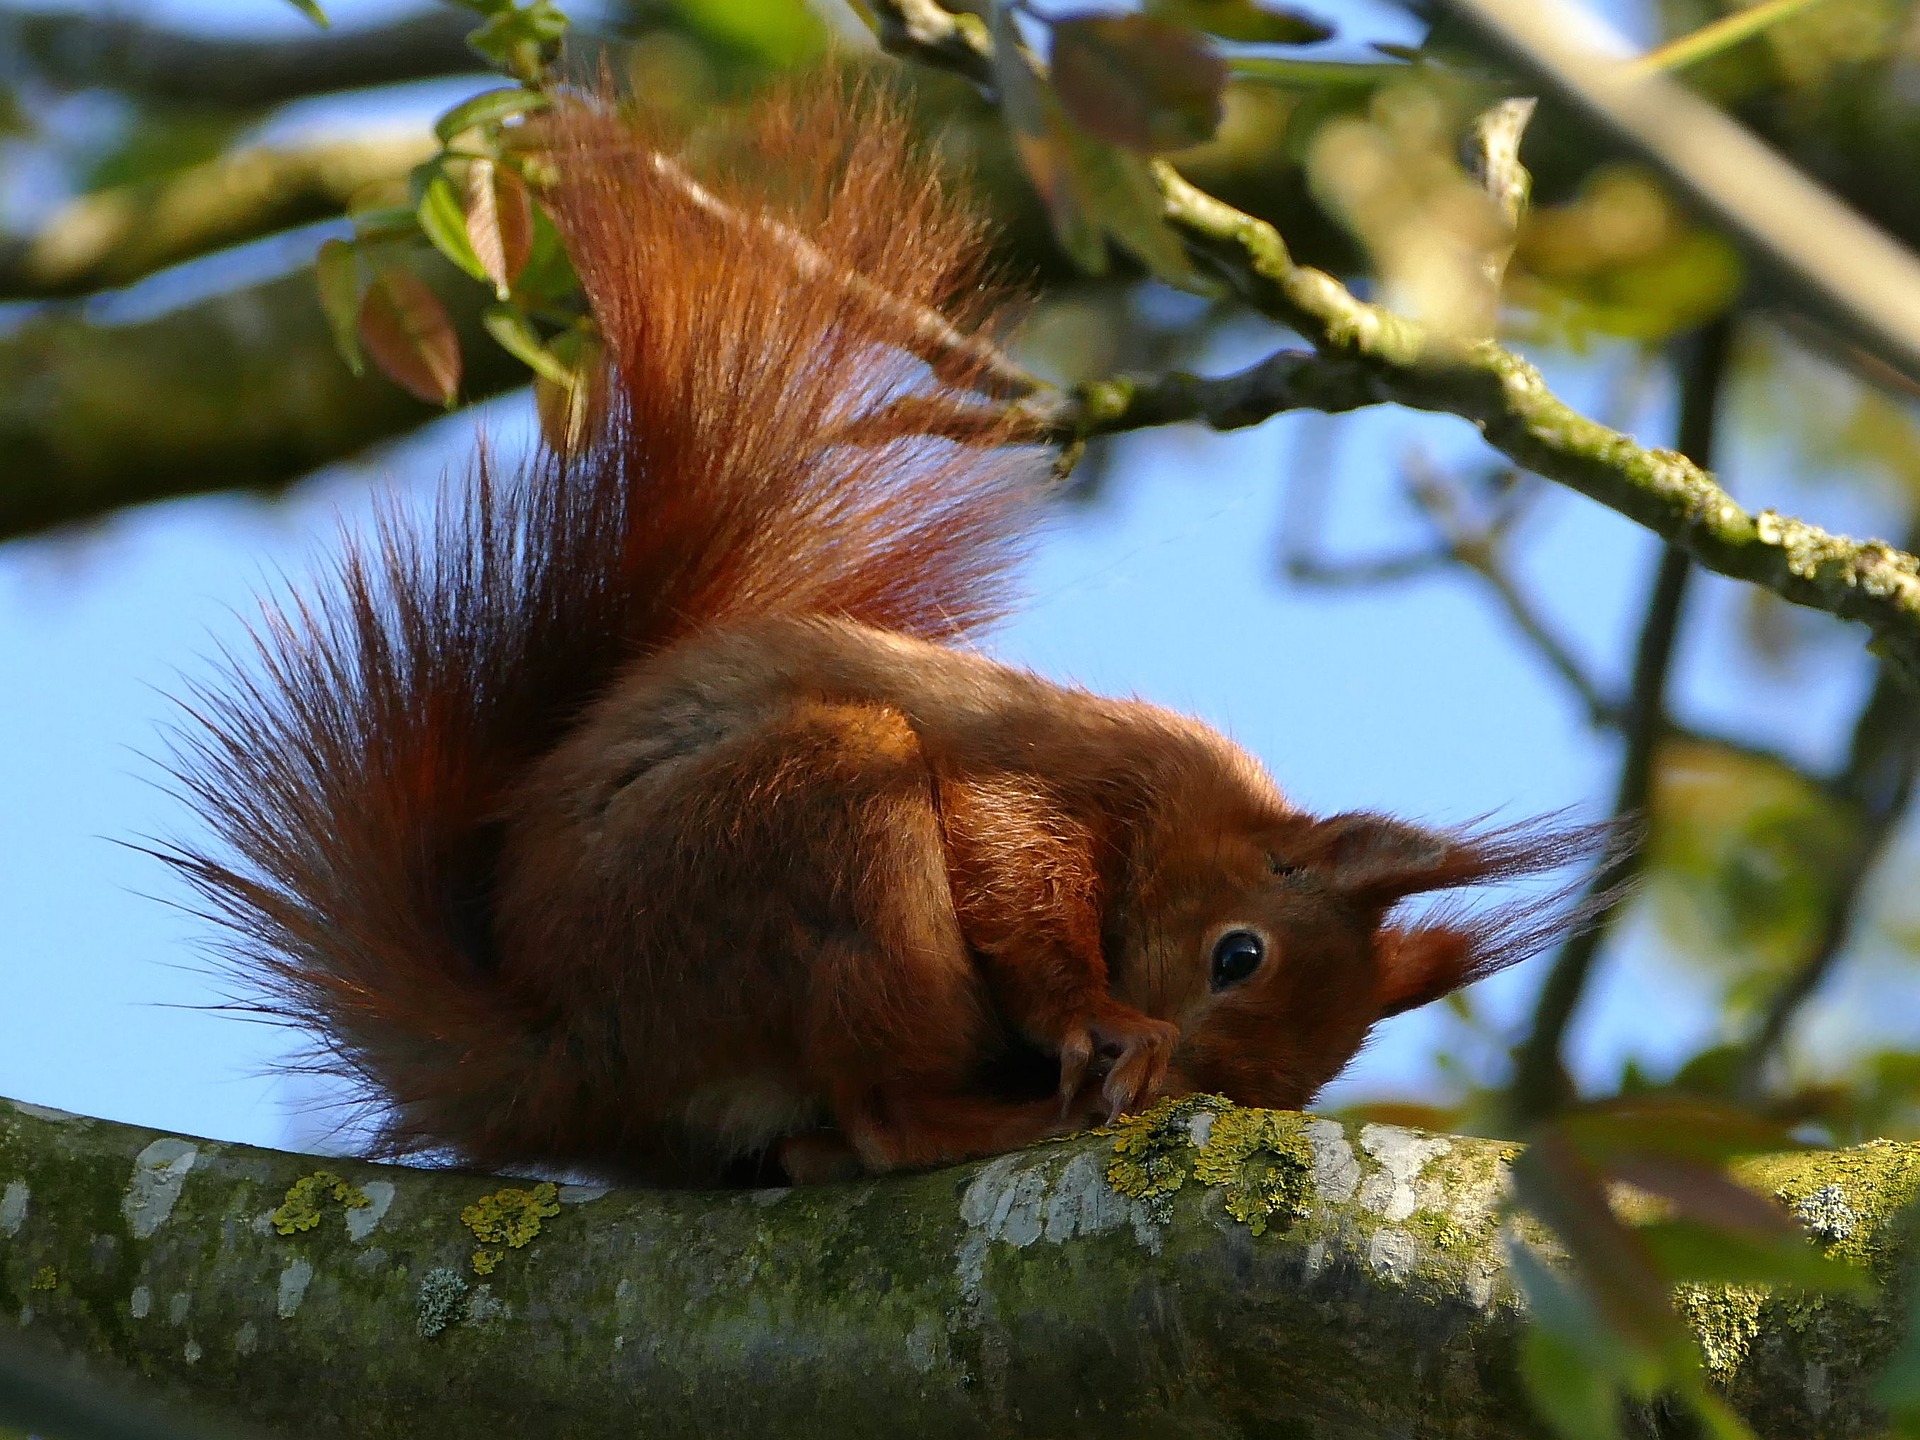 Red squirrels play in the trees and grounds at Birchbrae Luxury Self-catering Lodges near Fort William